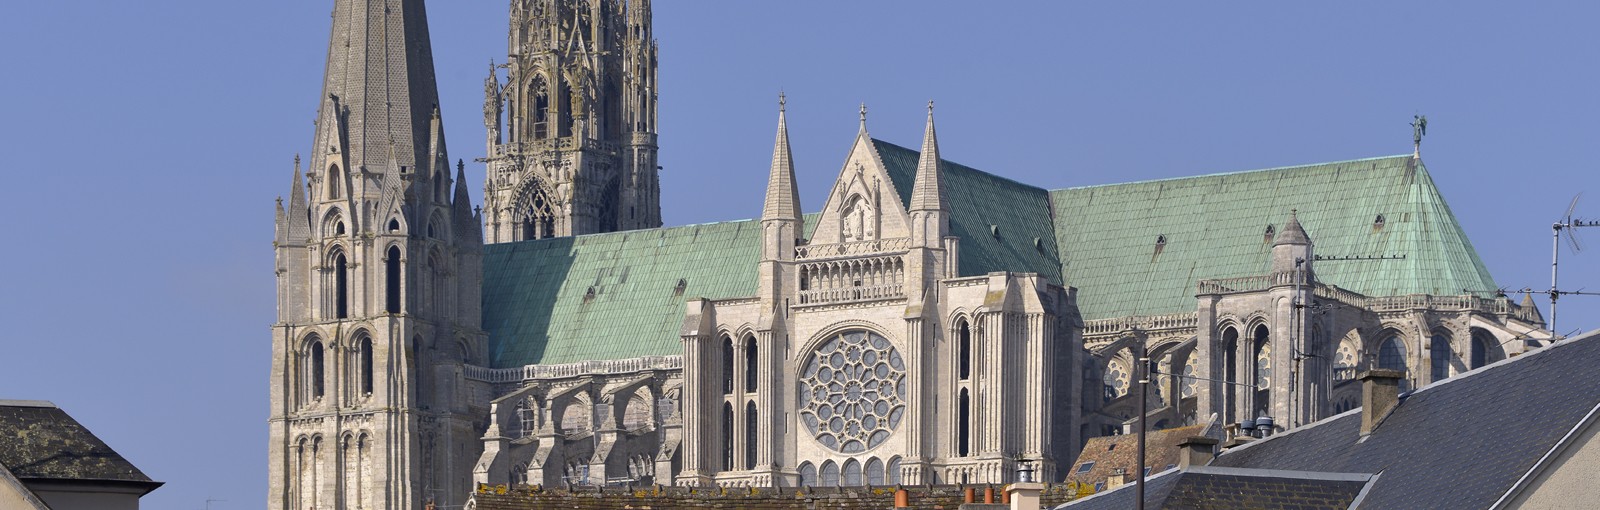 Tours Chartres town and cathedral - Half days - Day tours from Paris